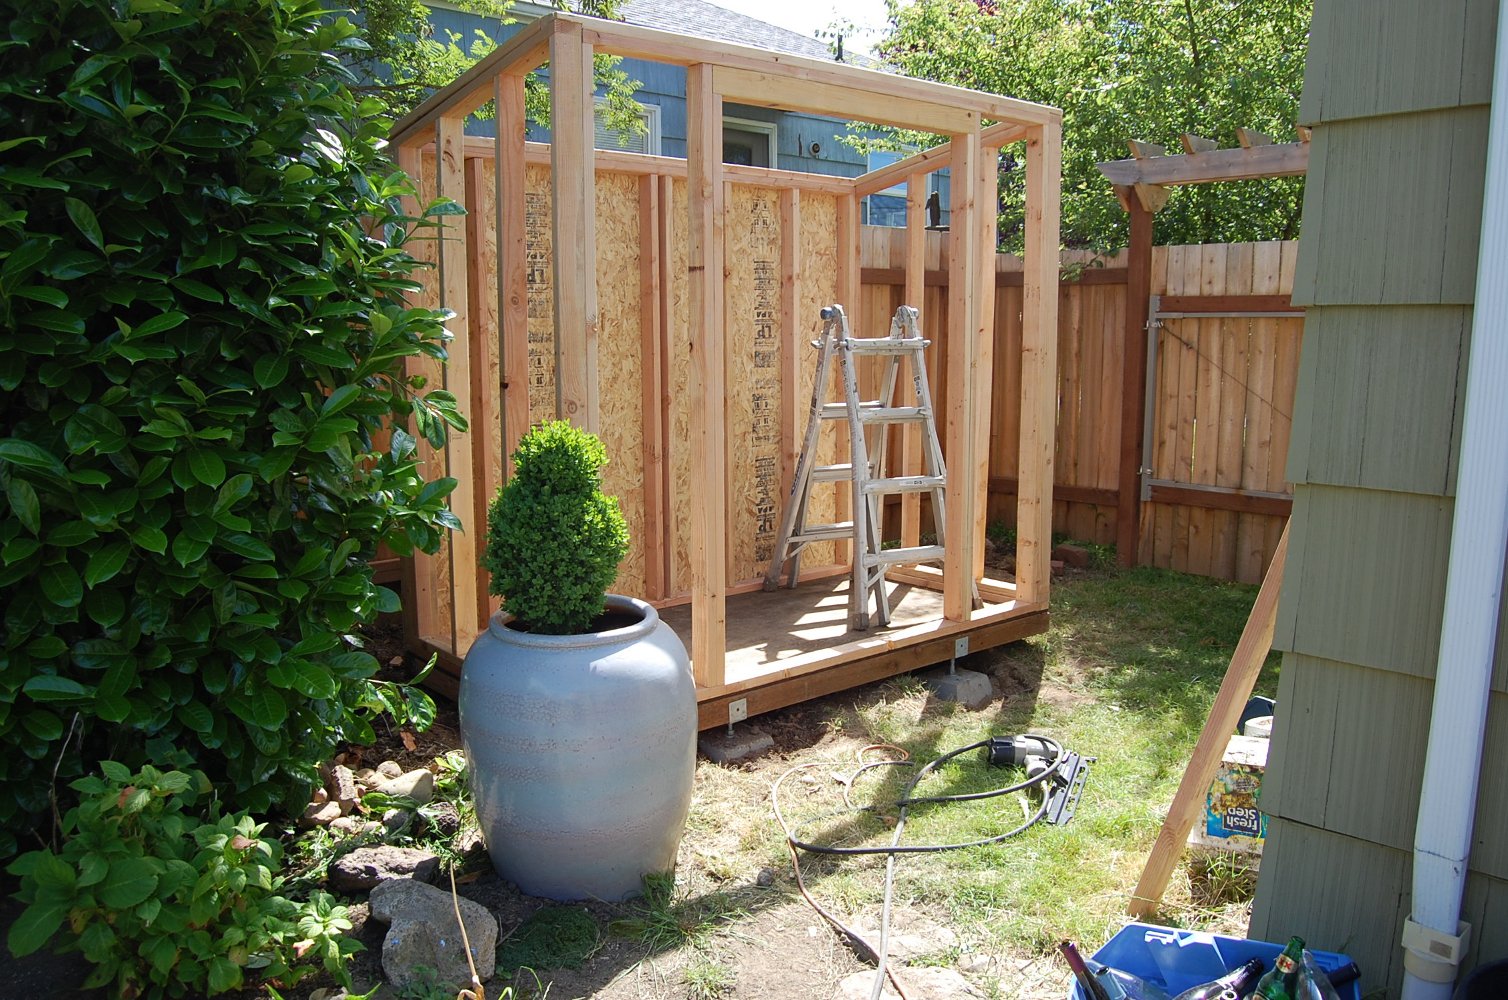 Building A Shed